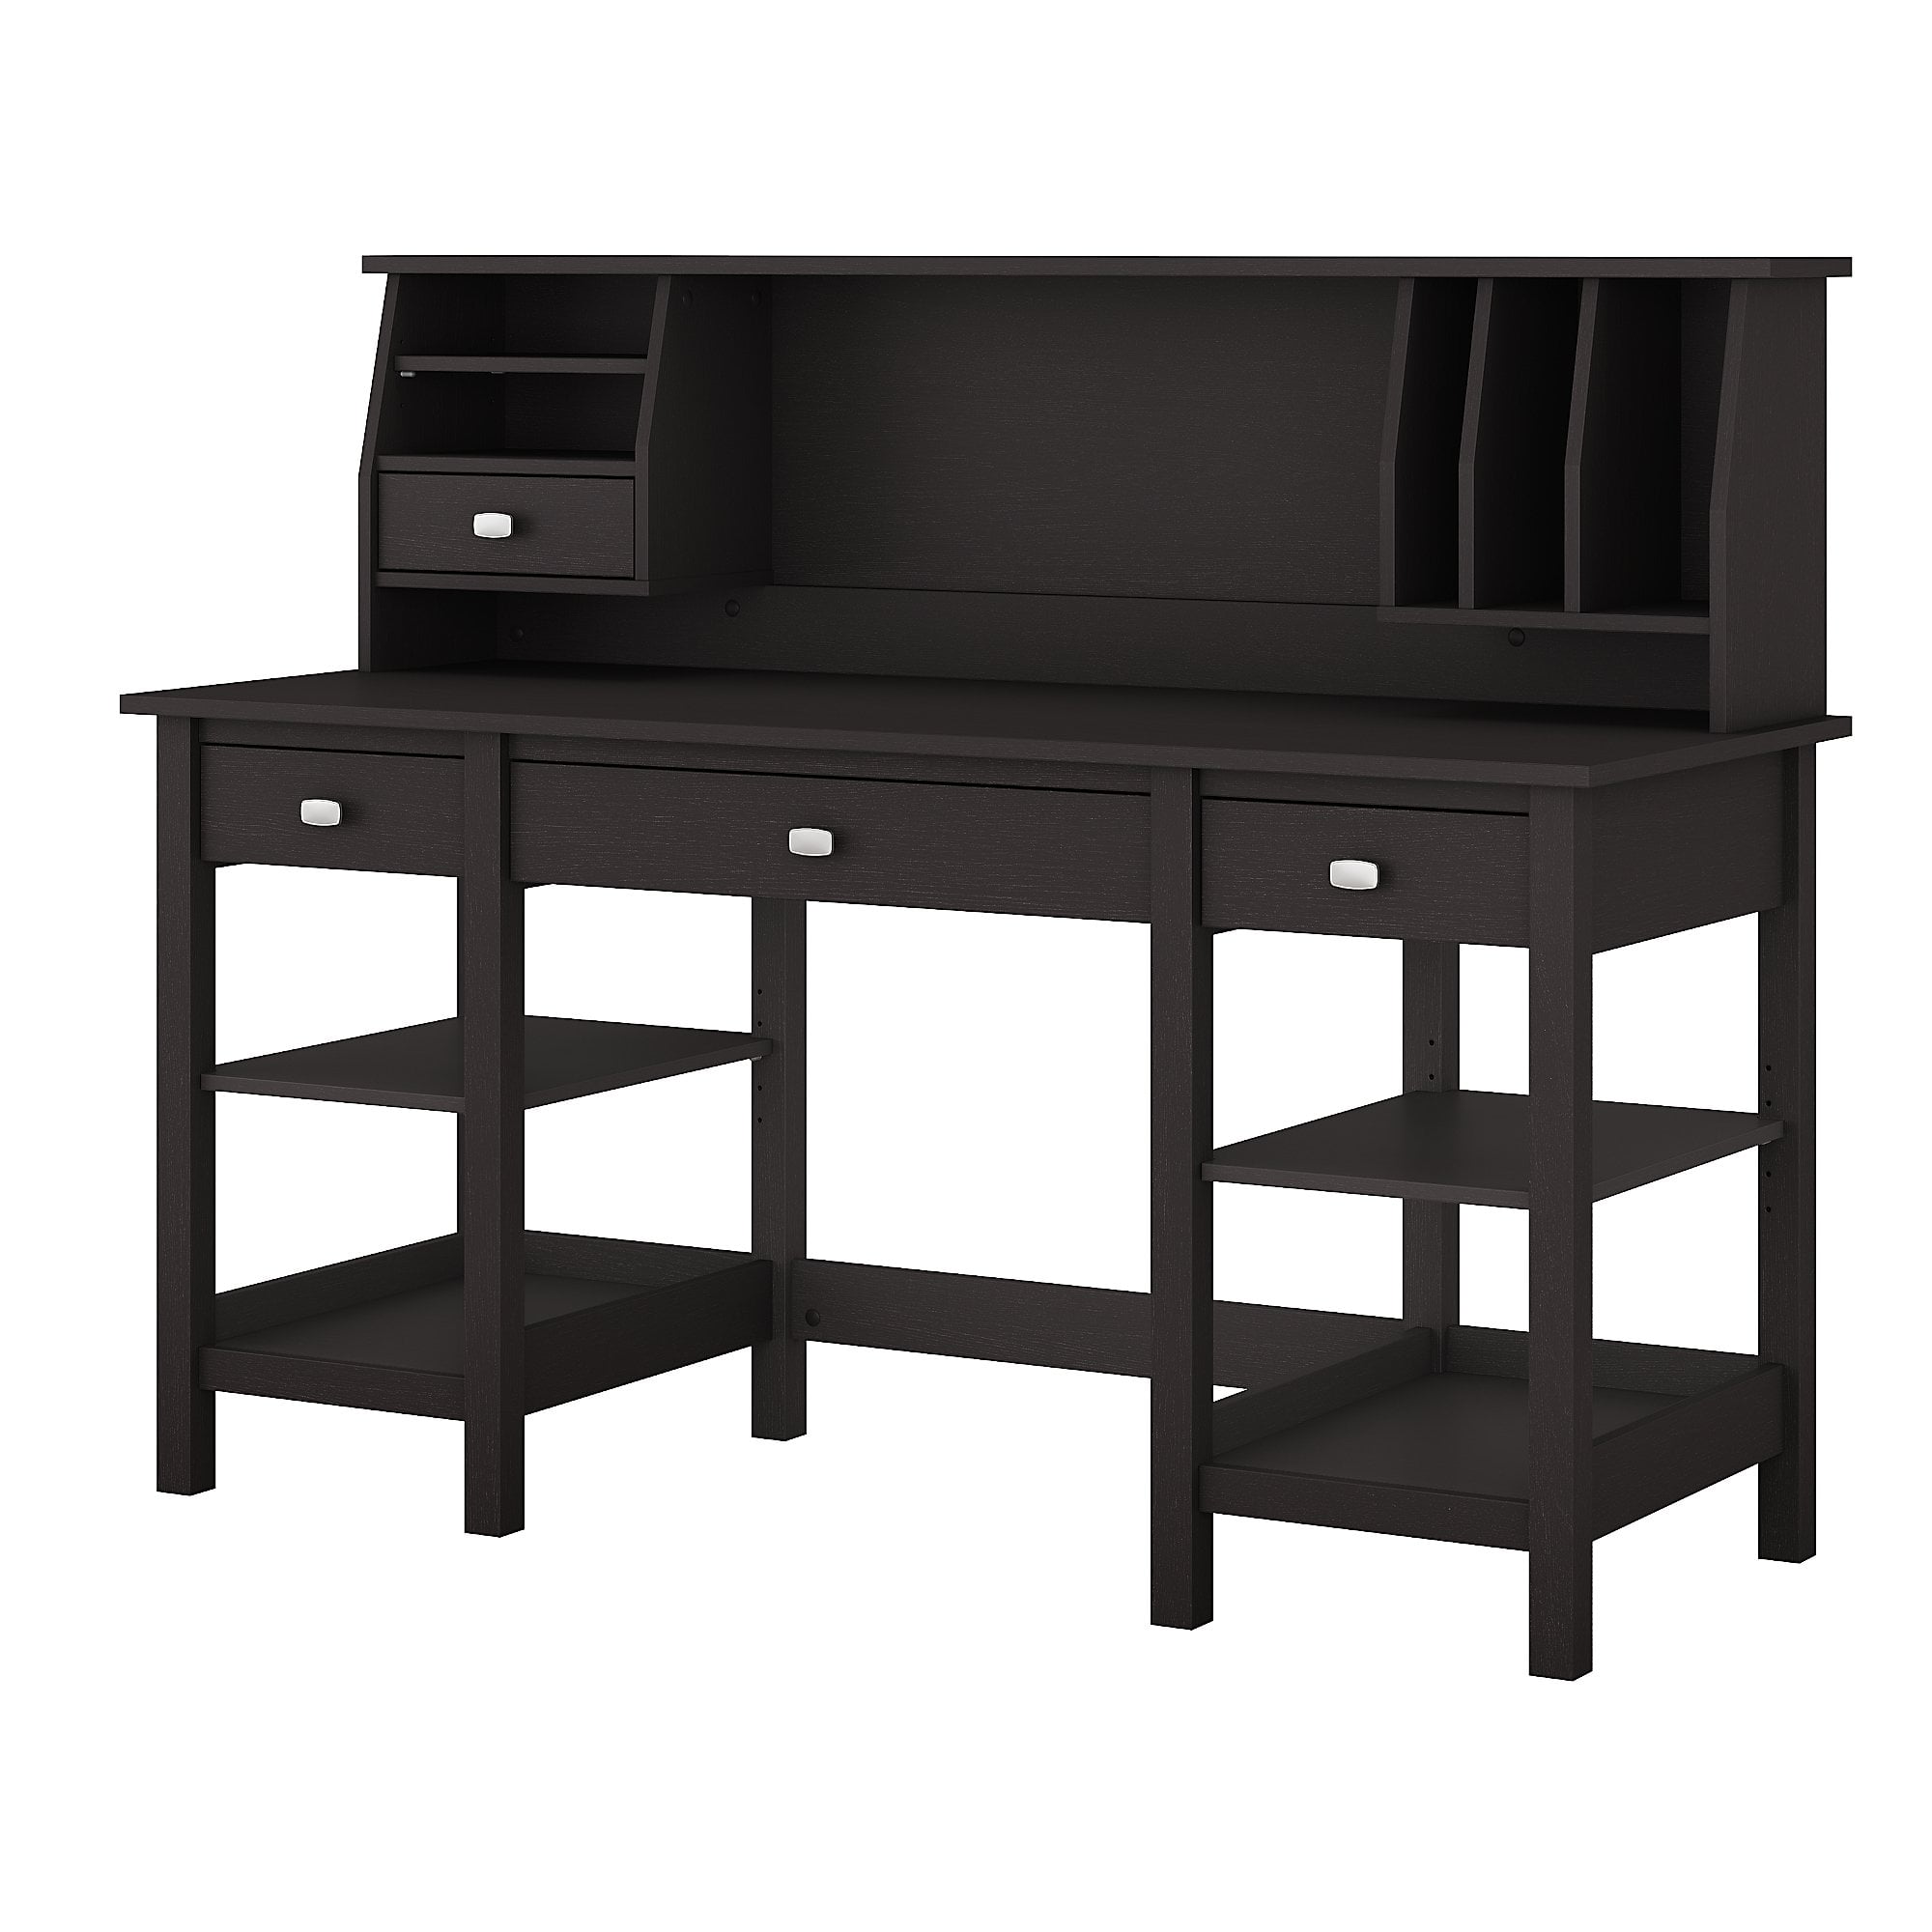 Bush Furniture Broadview 60w Desk With Storage Shelves And Small